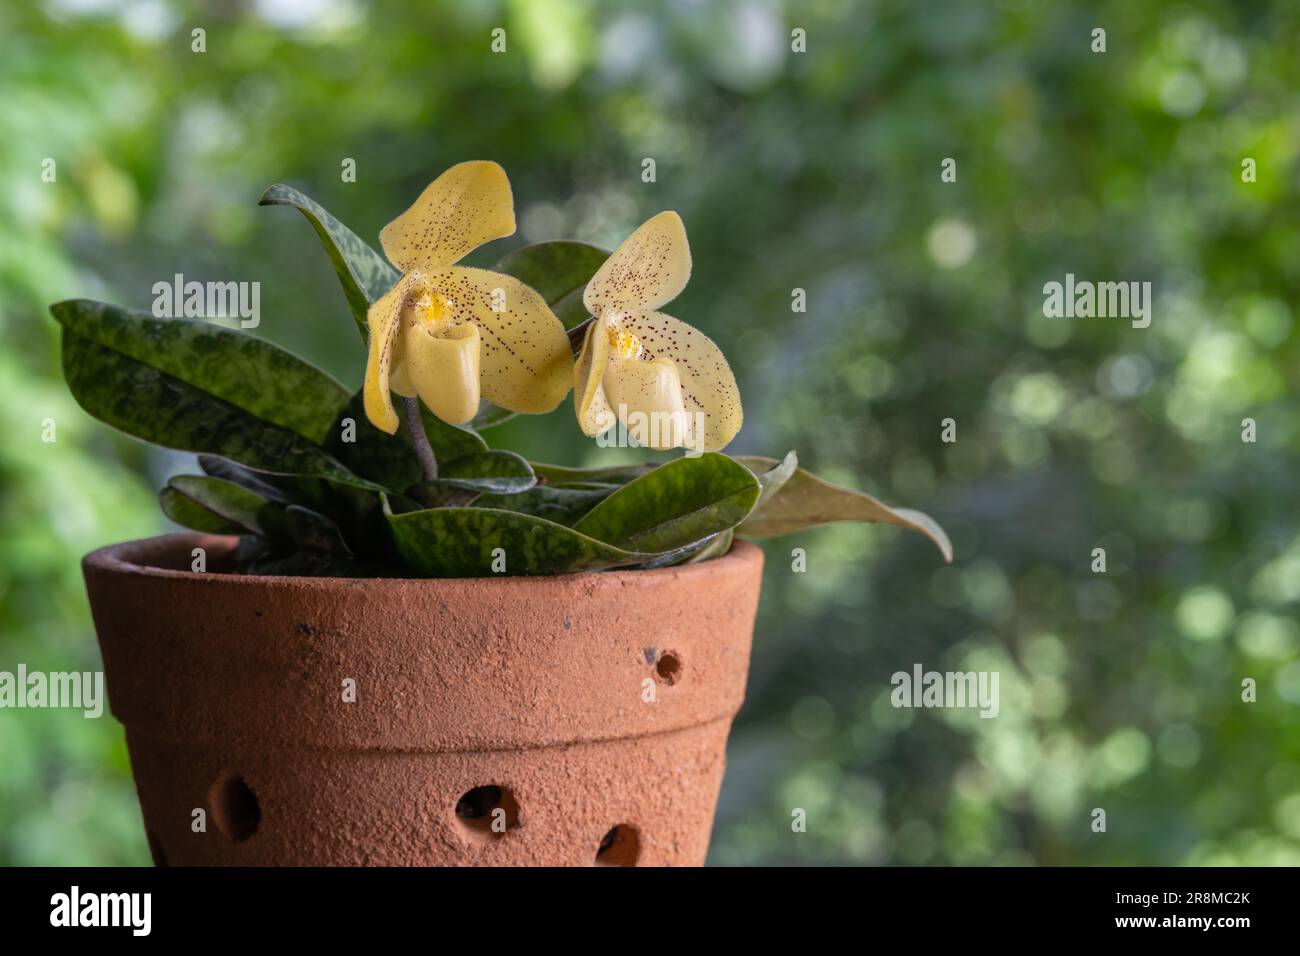 Closeup view of lady slipper orchid species paphiopedilum concolor in clay pot with delicate yellow flowers blooming outdoors on natural background Stock Photo